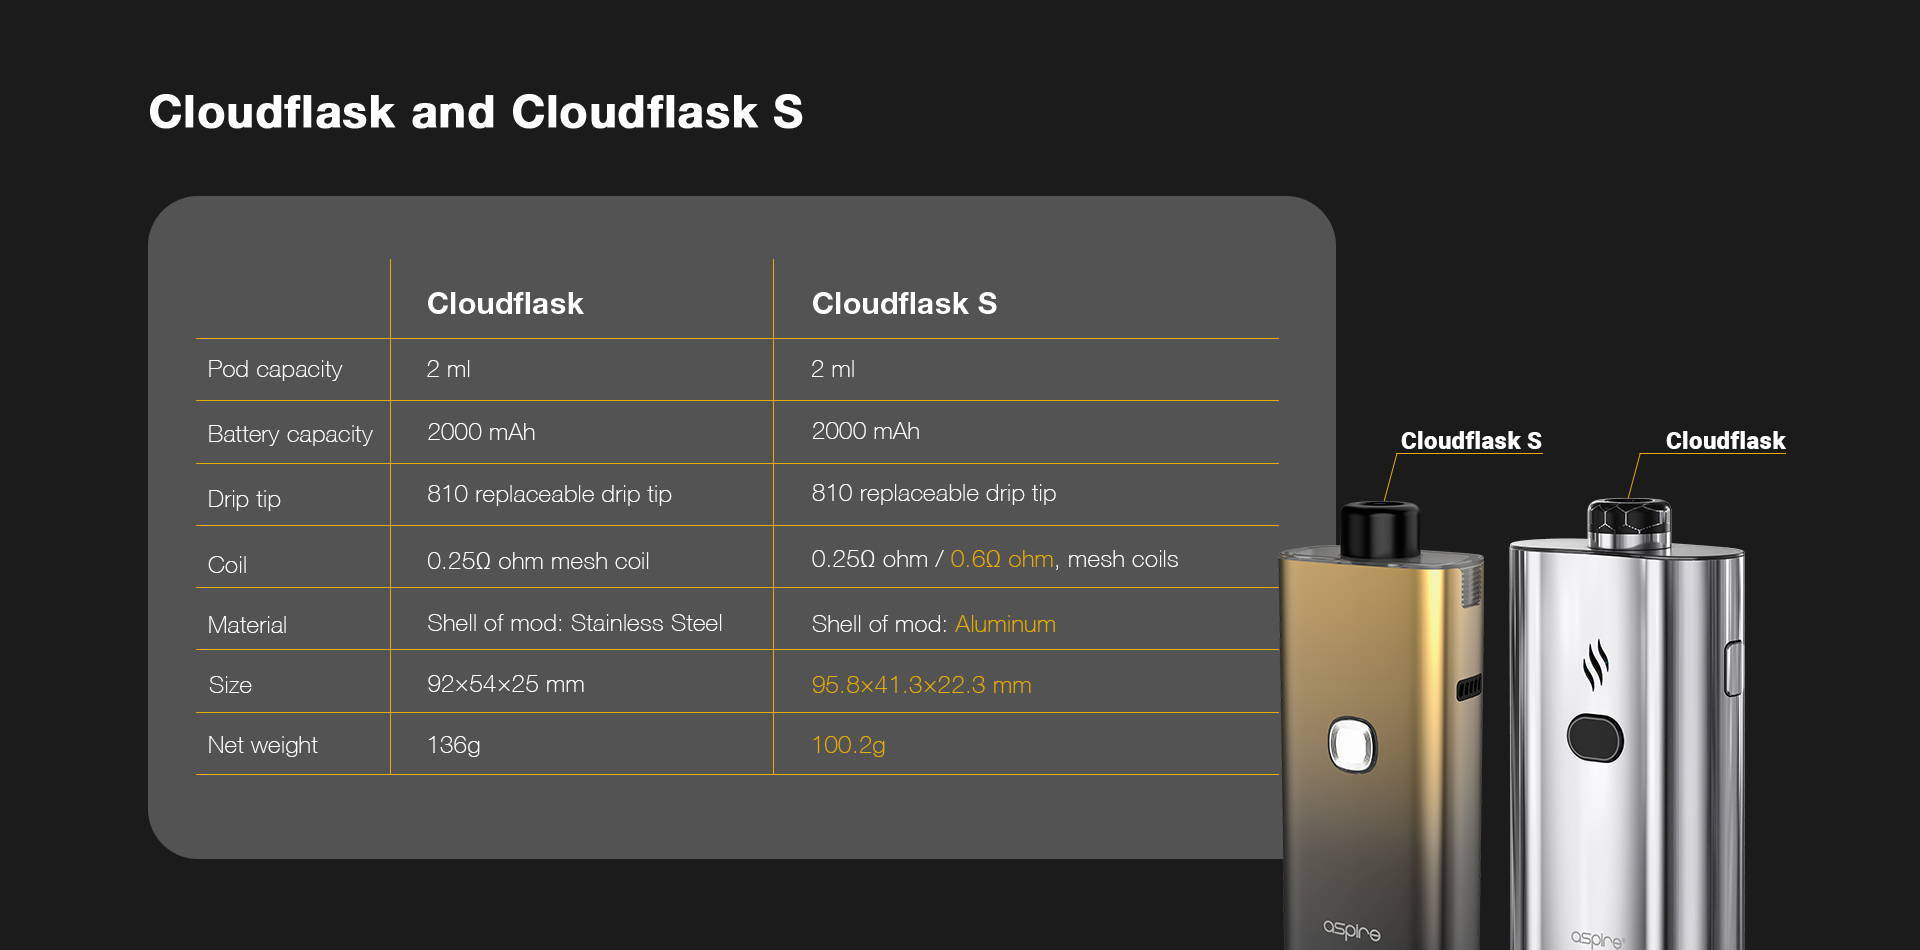 Cloudflask and Cloudflask S Comparison